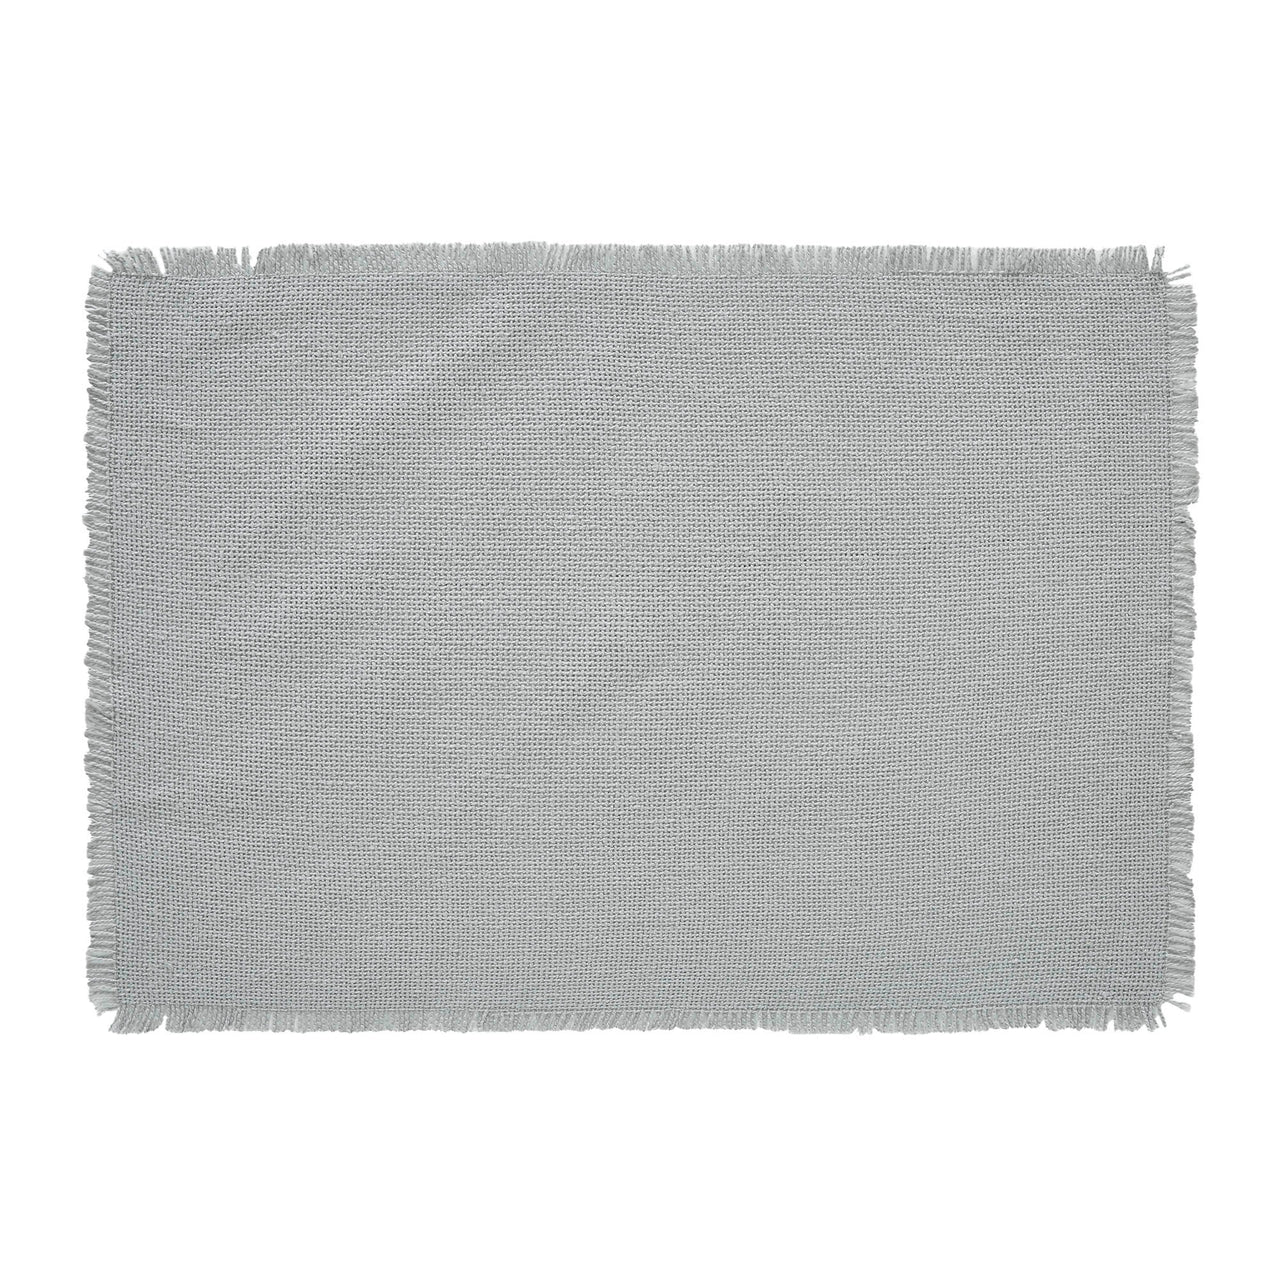 Burlap Dove Grey Placemat Set of 6 Fringed 13"x19" VHC Brands